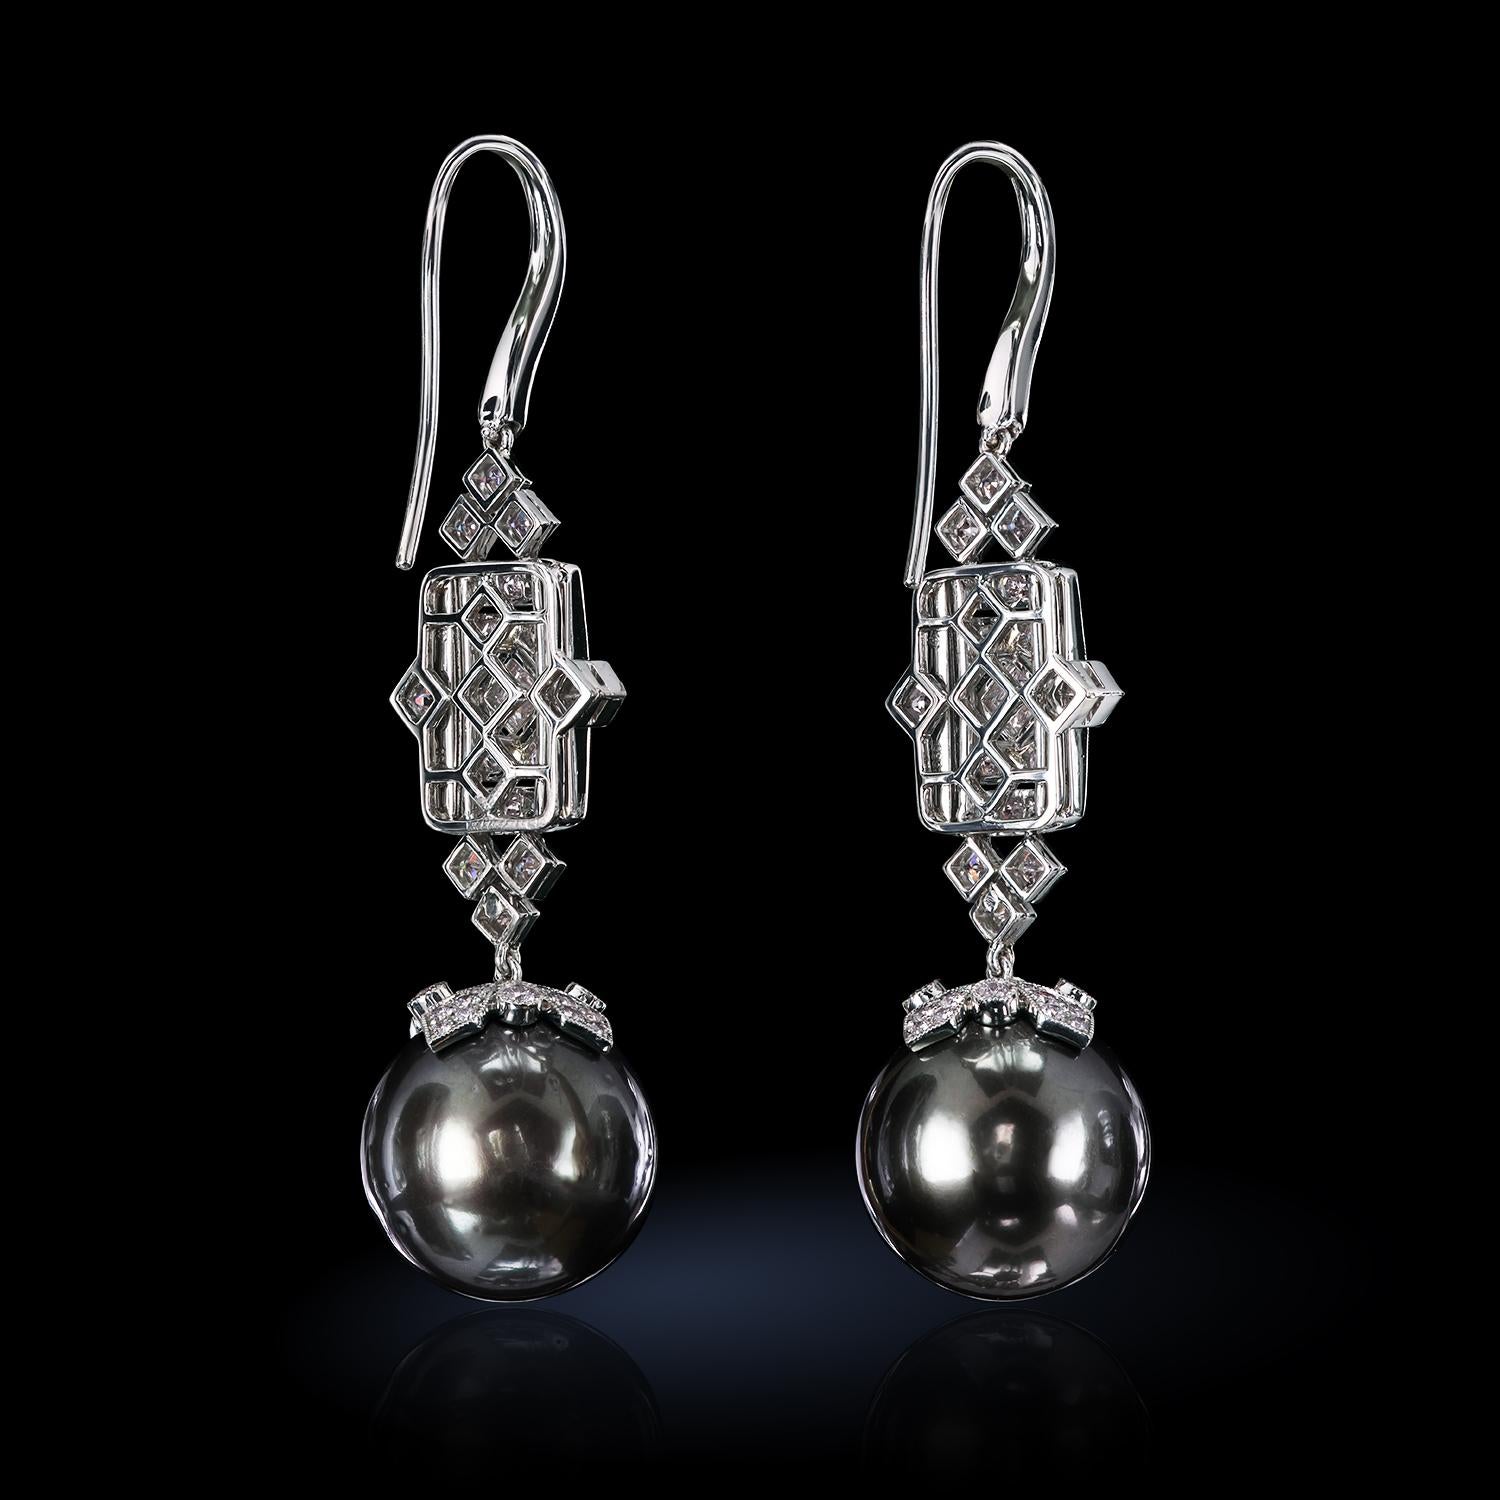 French Cut Leon Mege Art Deco Style Black Pearl and Diamonds French Wire Earrings For Sale